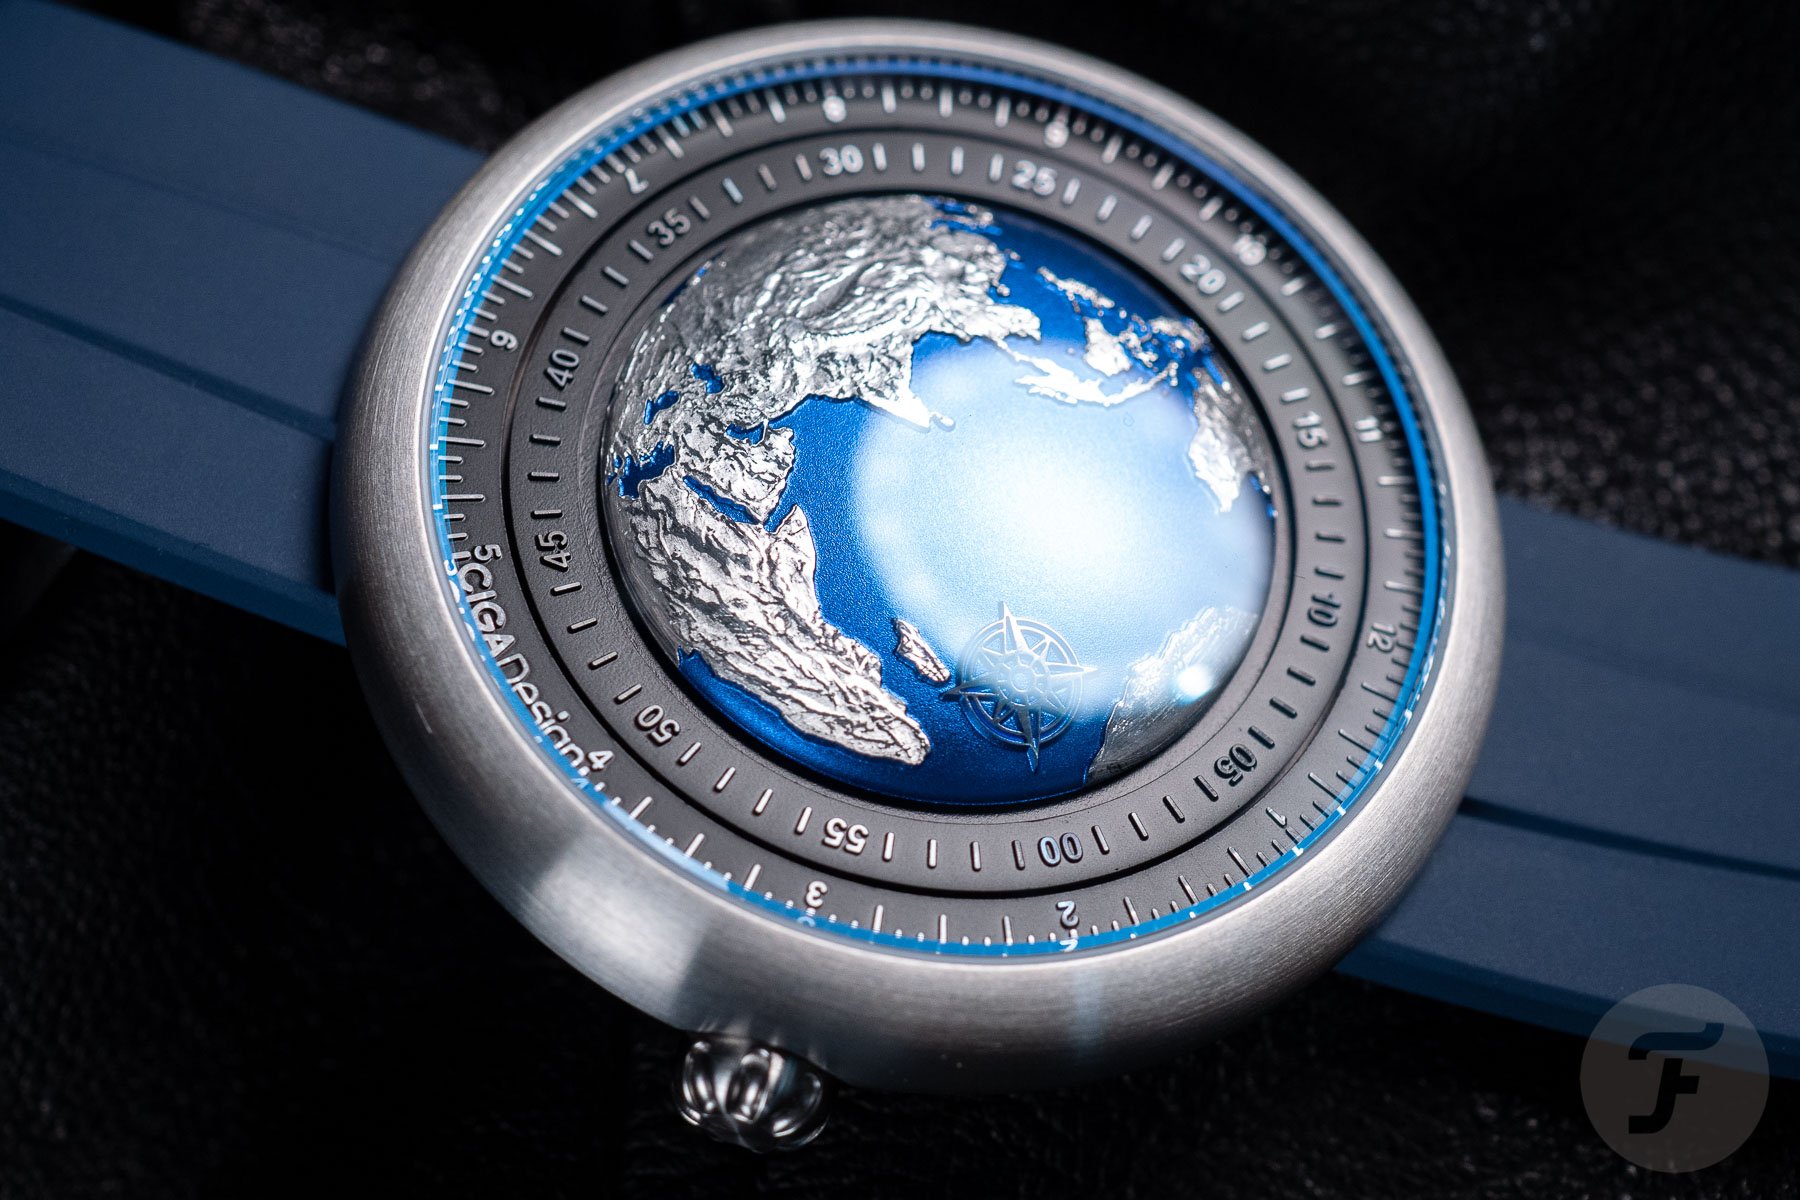 【F】 Hands-On Review: The CIGA Design Blue Planet